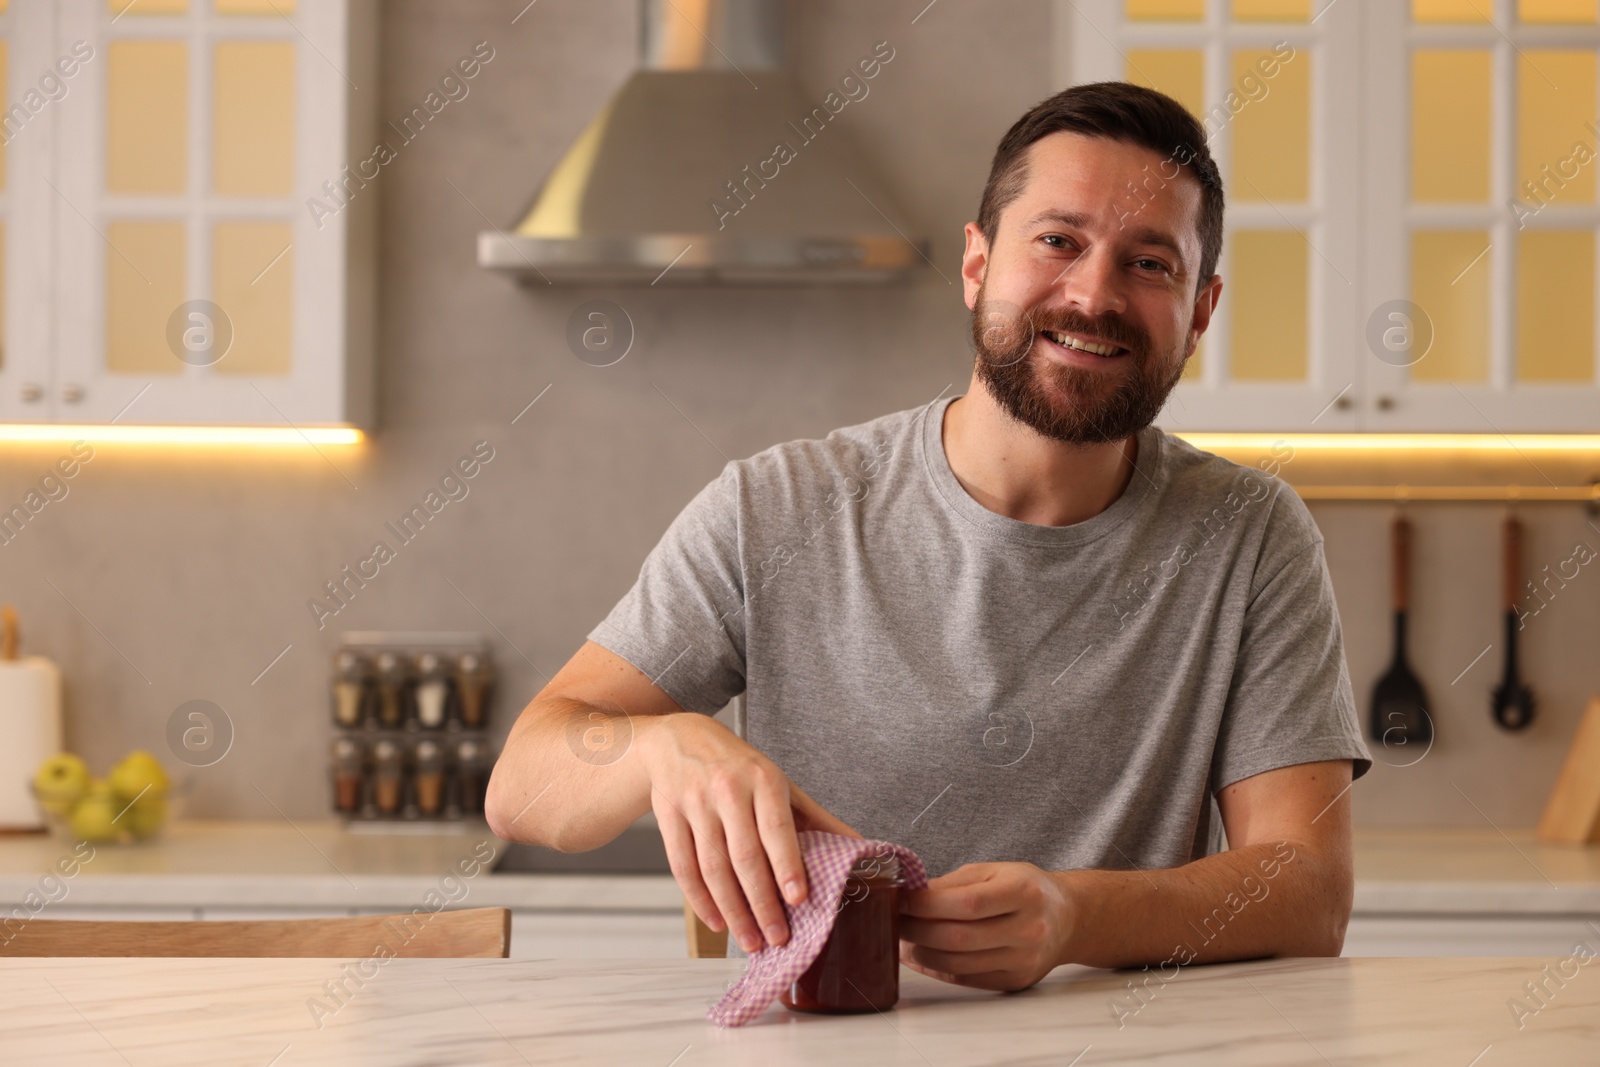 Photo of Man packing jar of jam into beeswax food wrap at table in kitchen